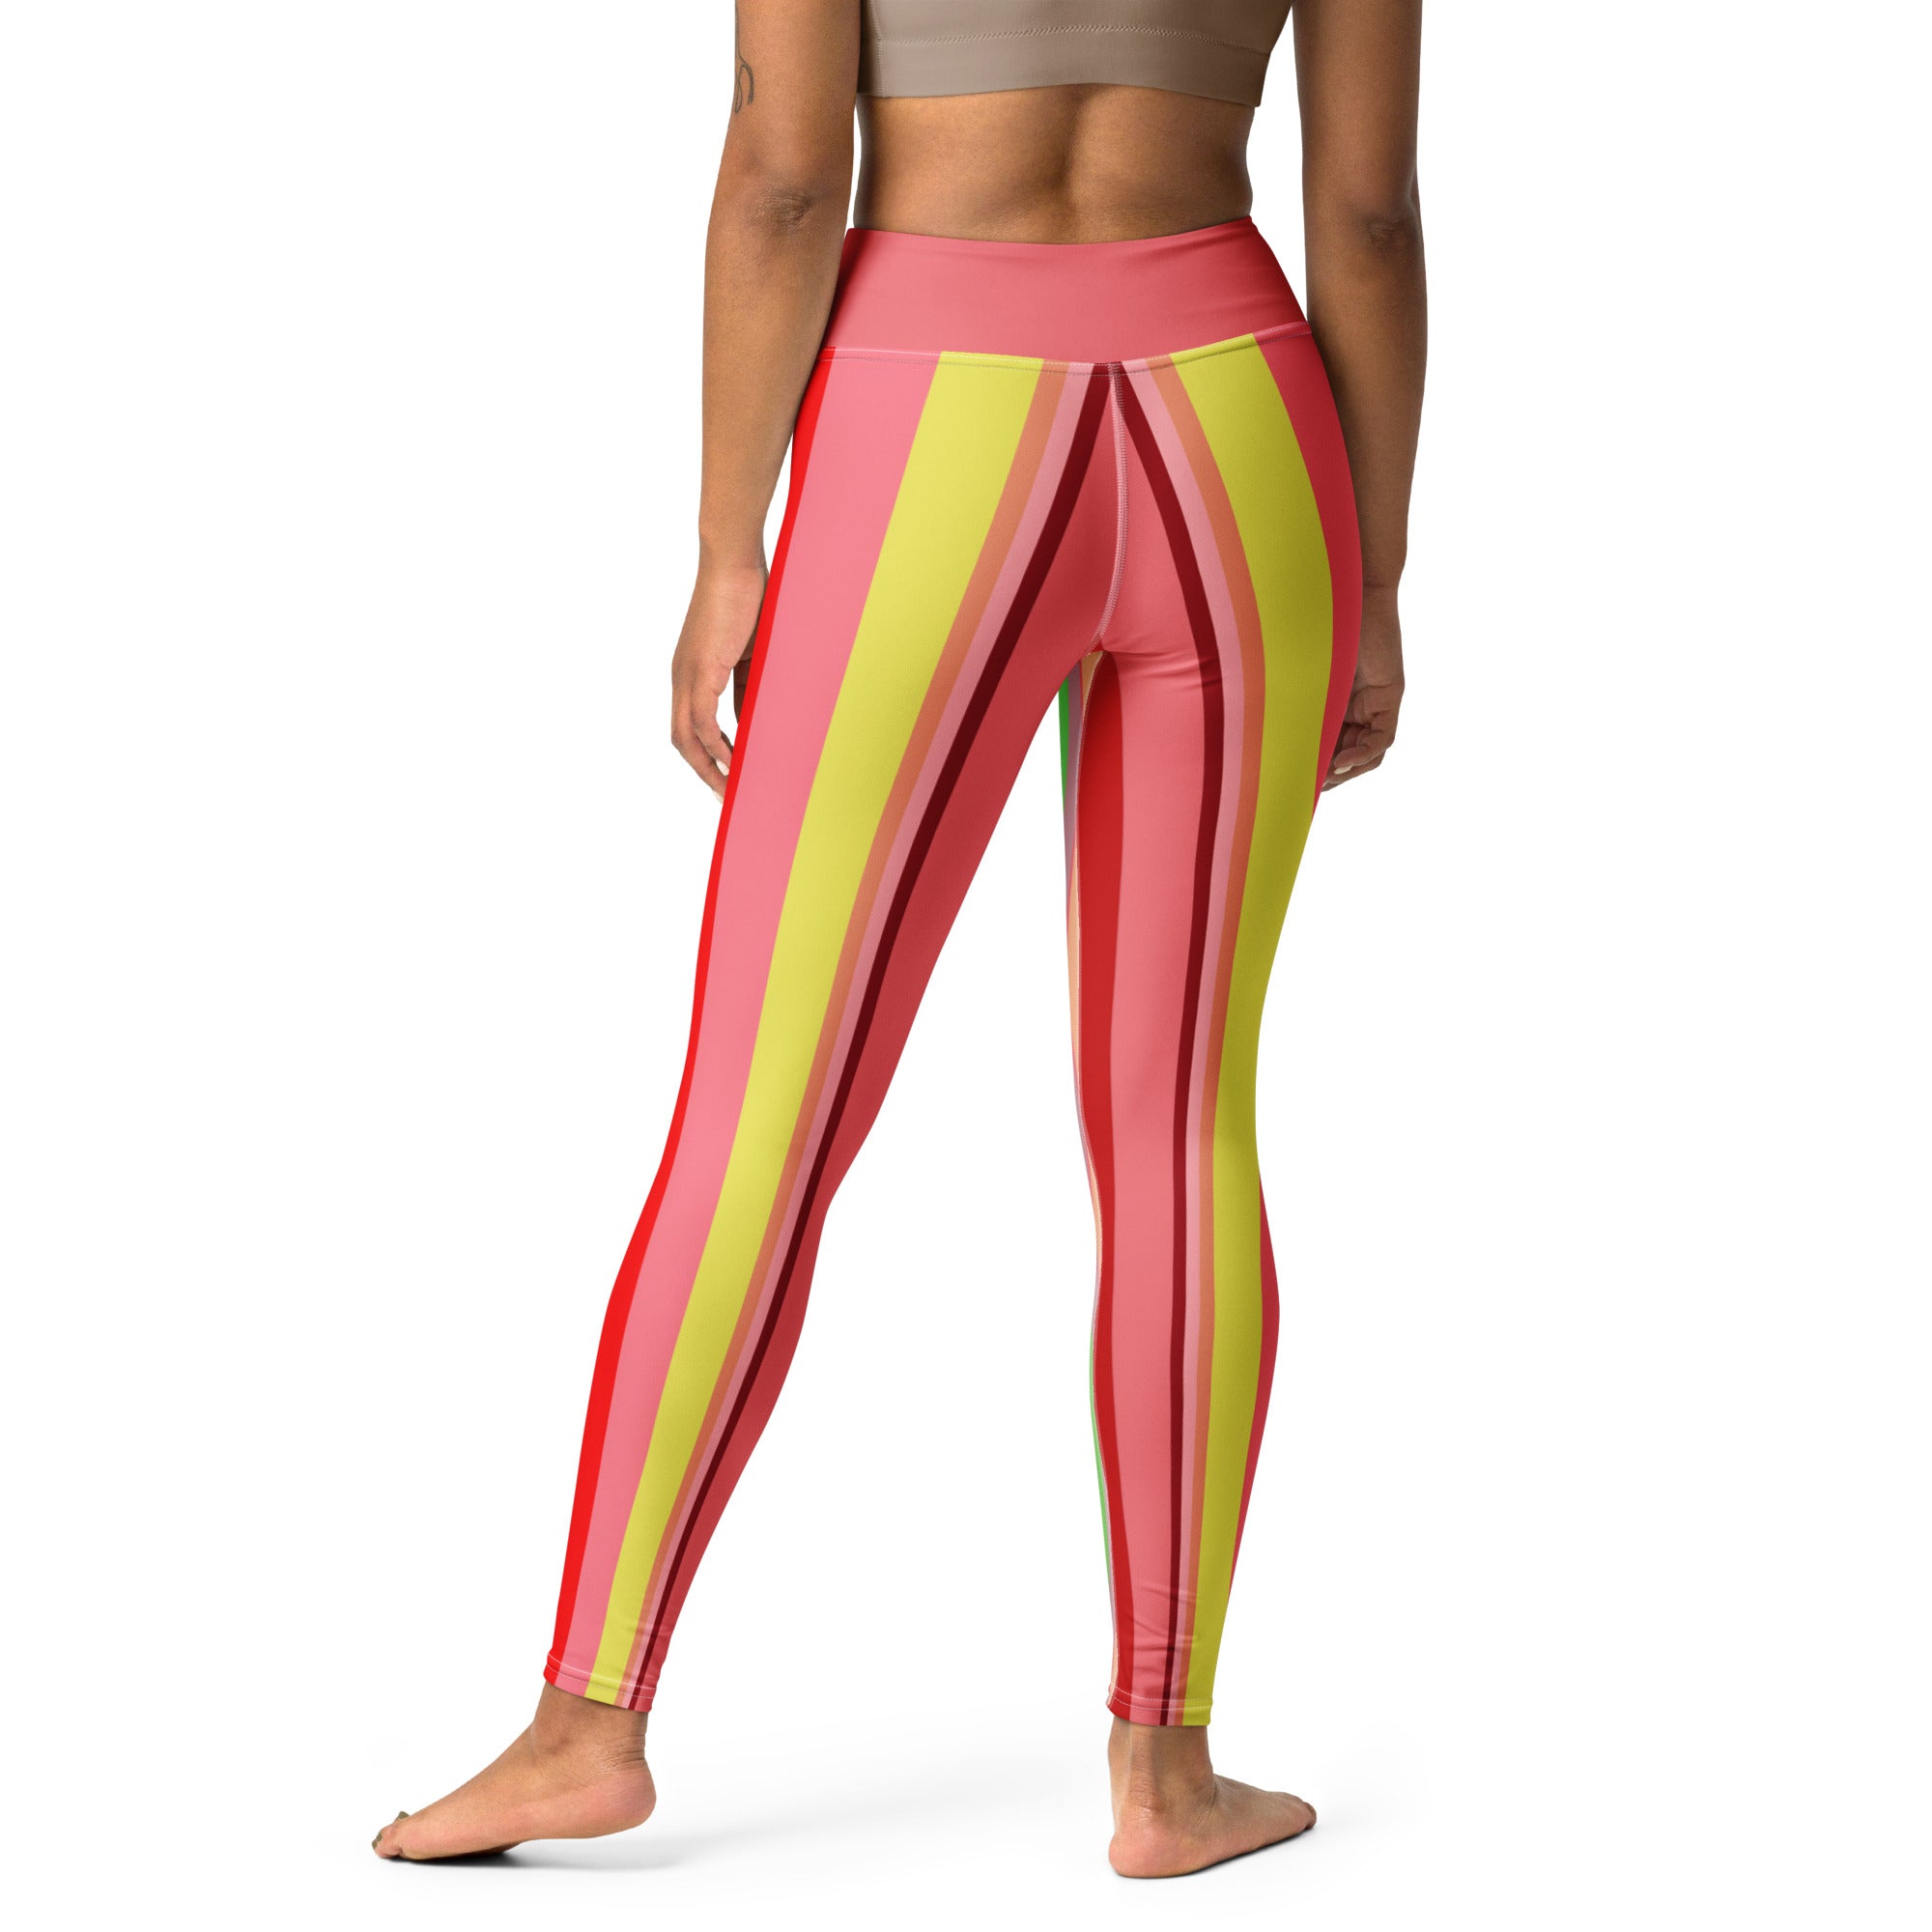 Colorful and stretchy Rainbow Cascade leggings, ideal for yoga, pilates, and fitness enthusiasts.